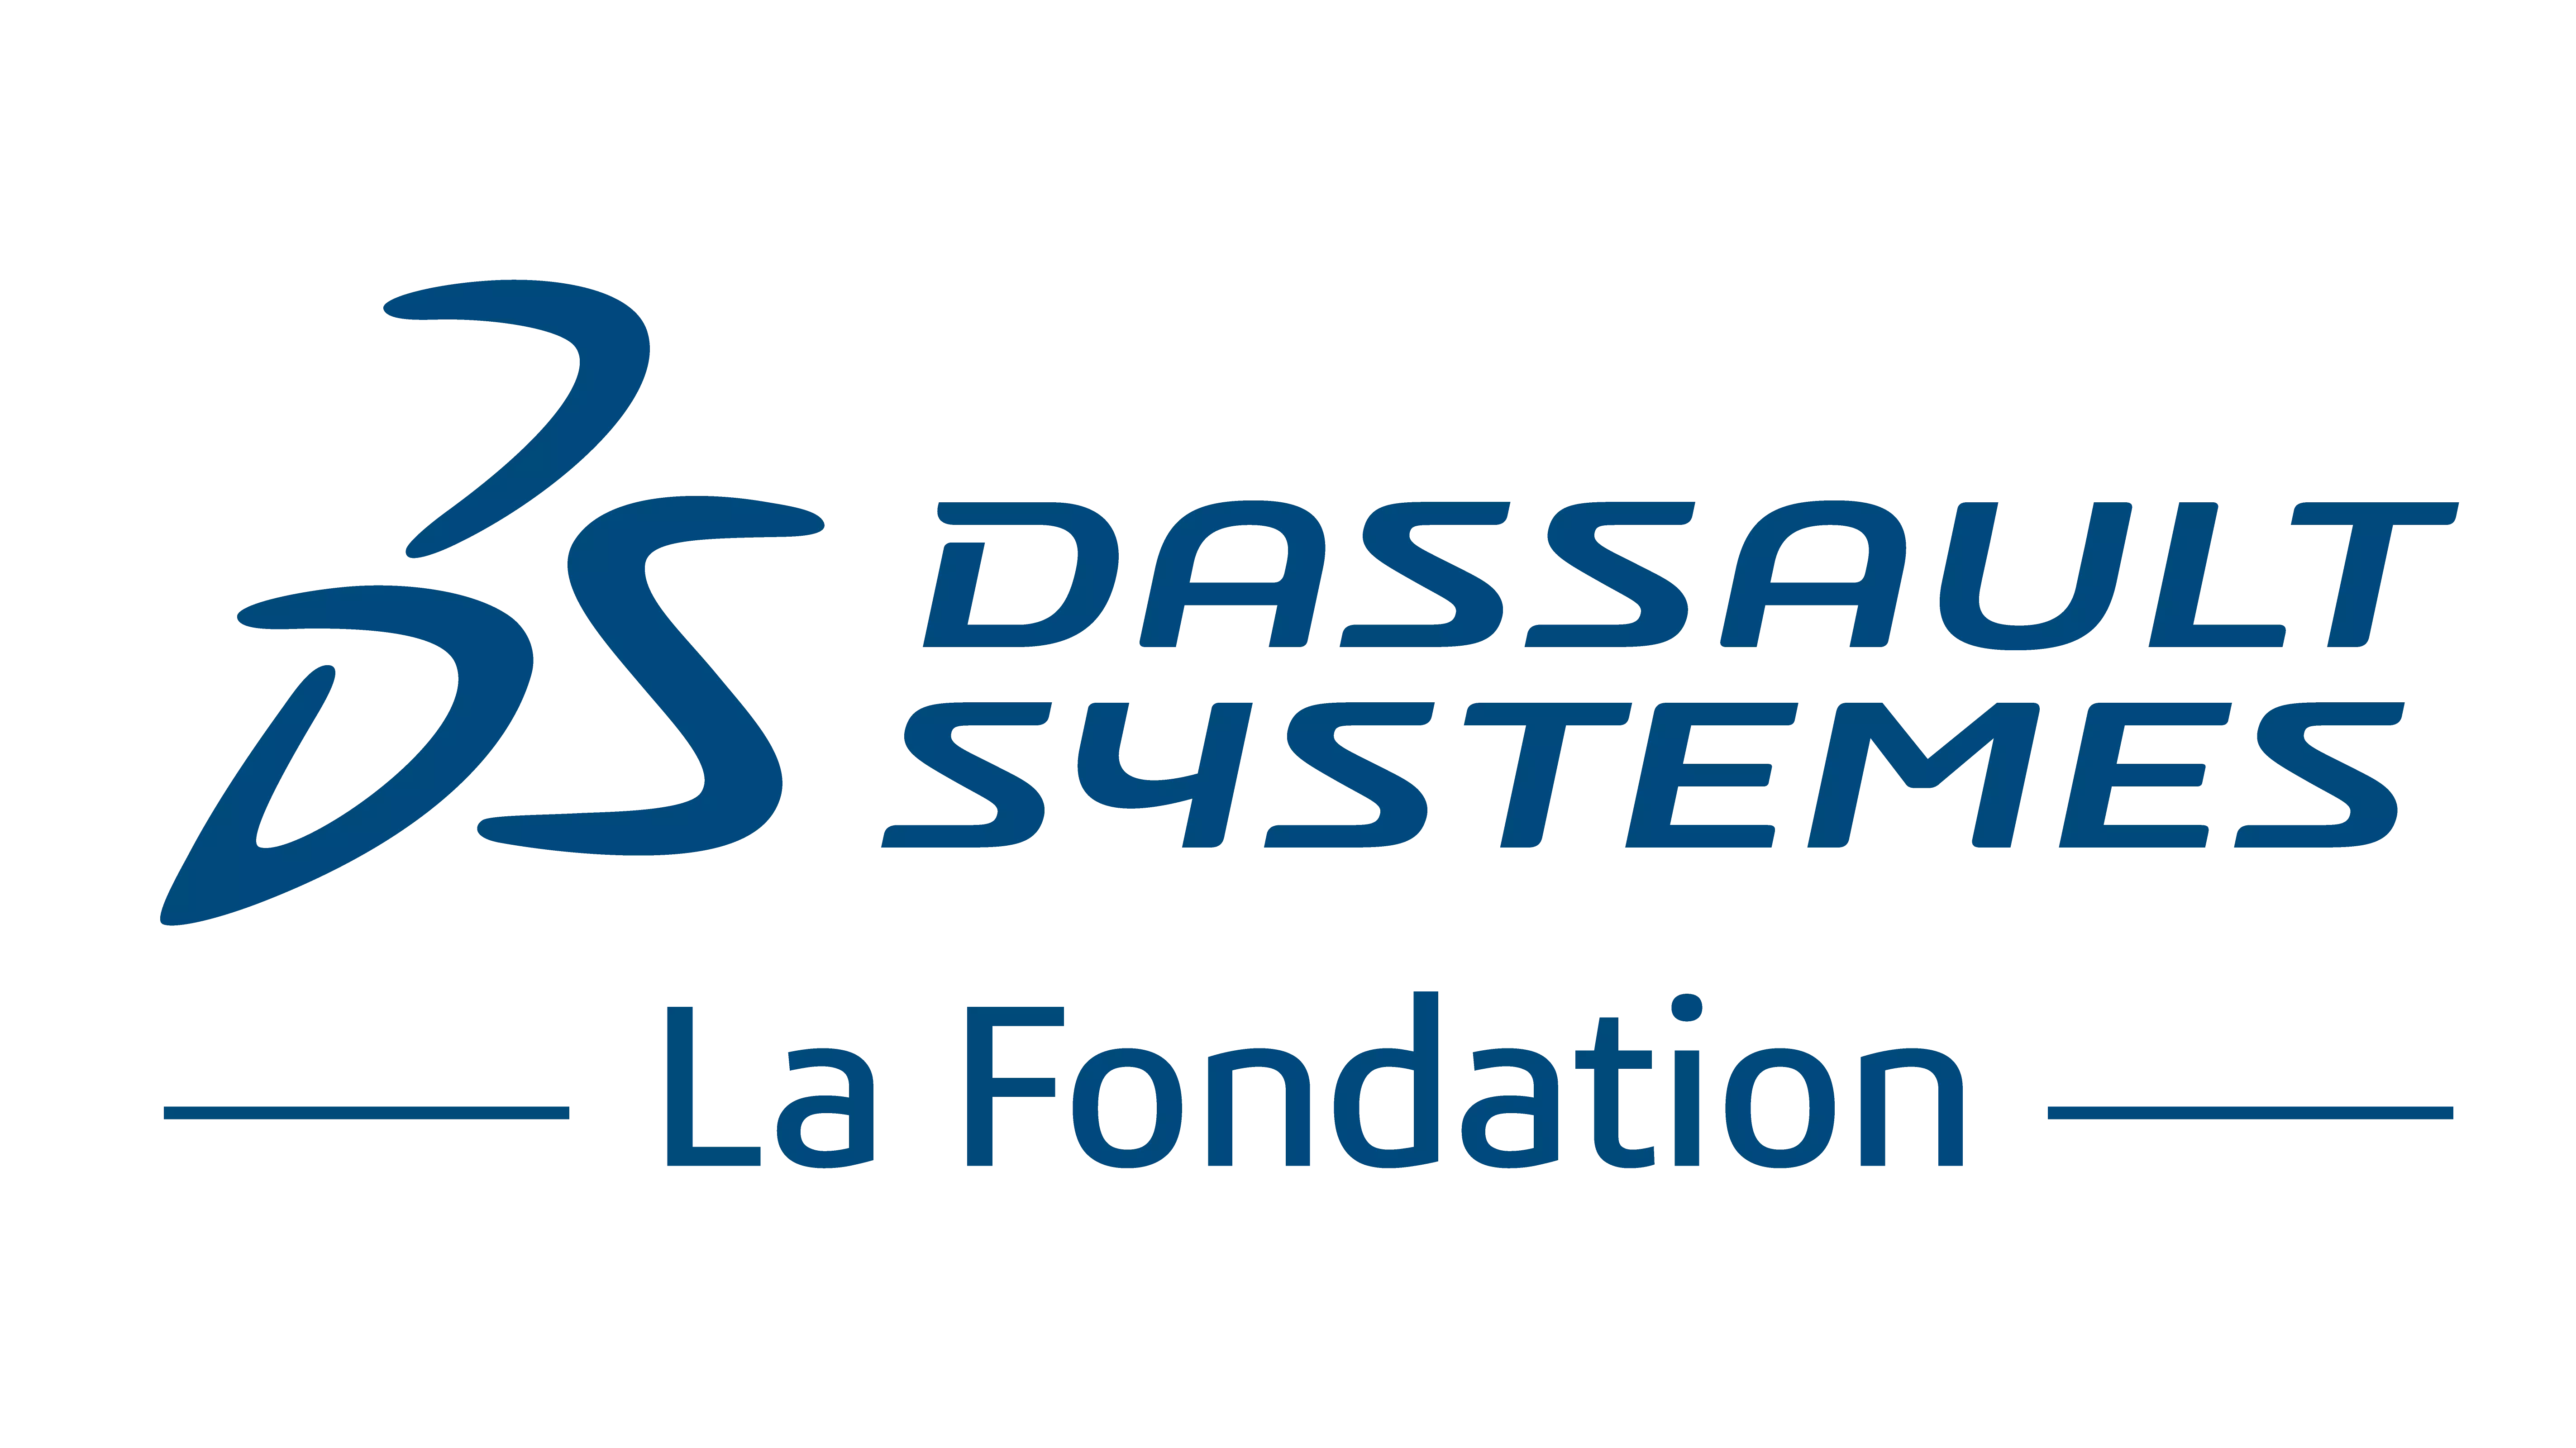 This project is funded by La Fondation Dassault Systèmes